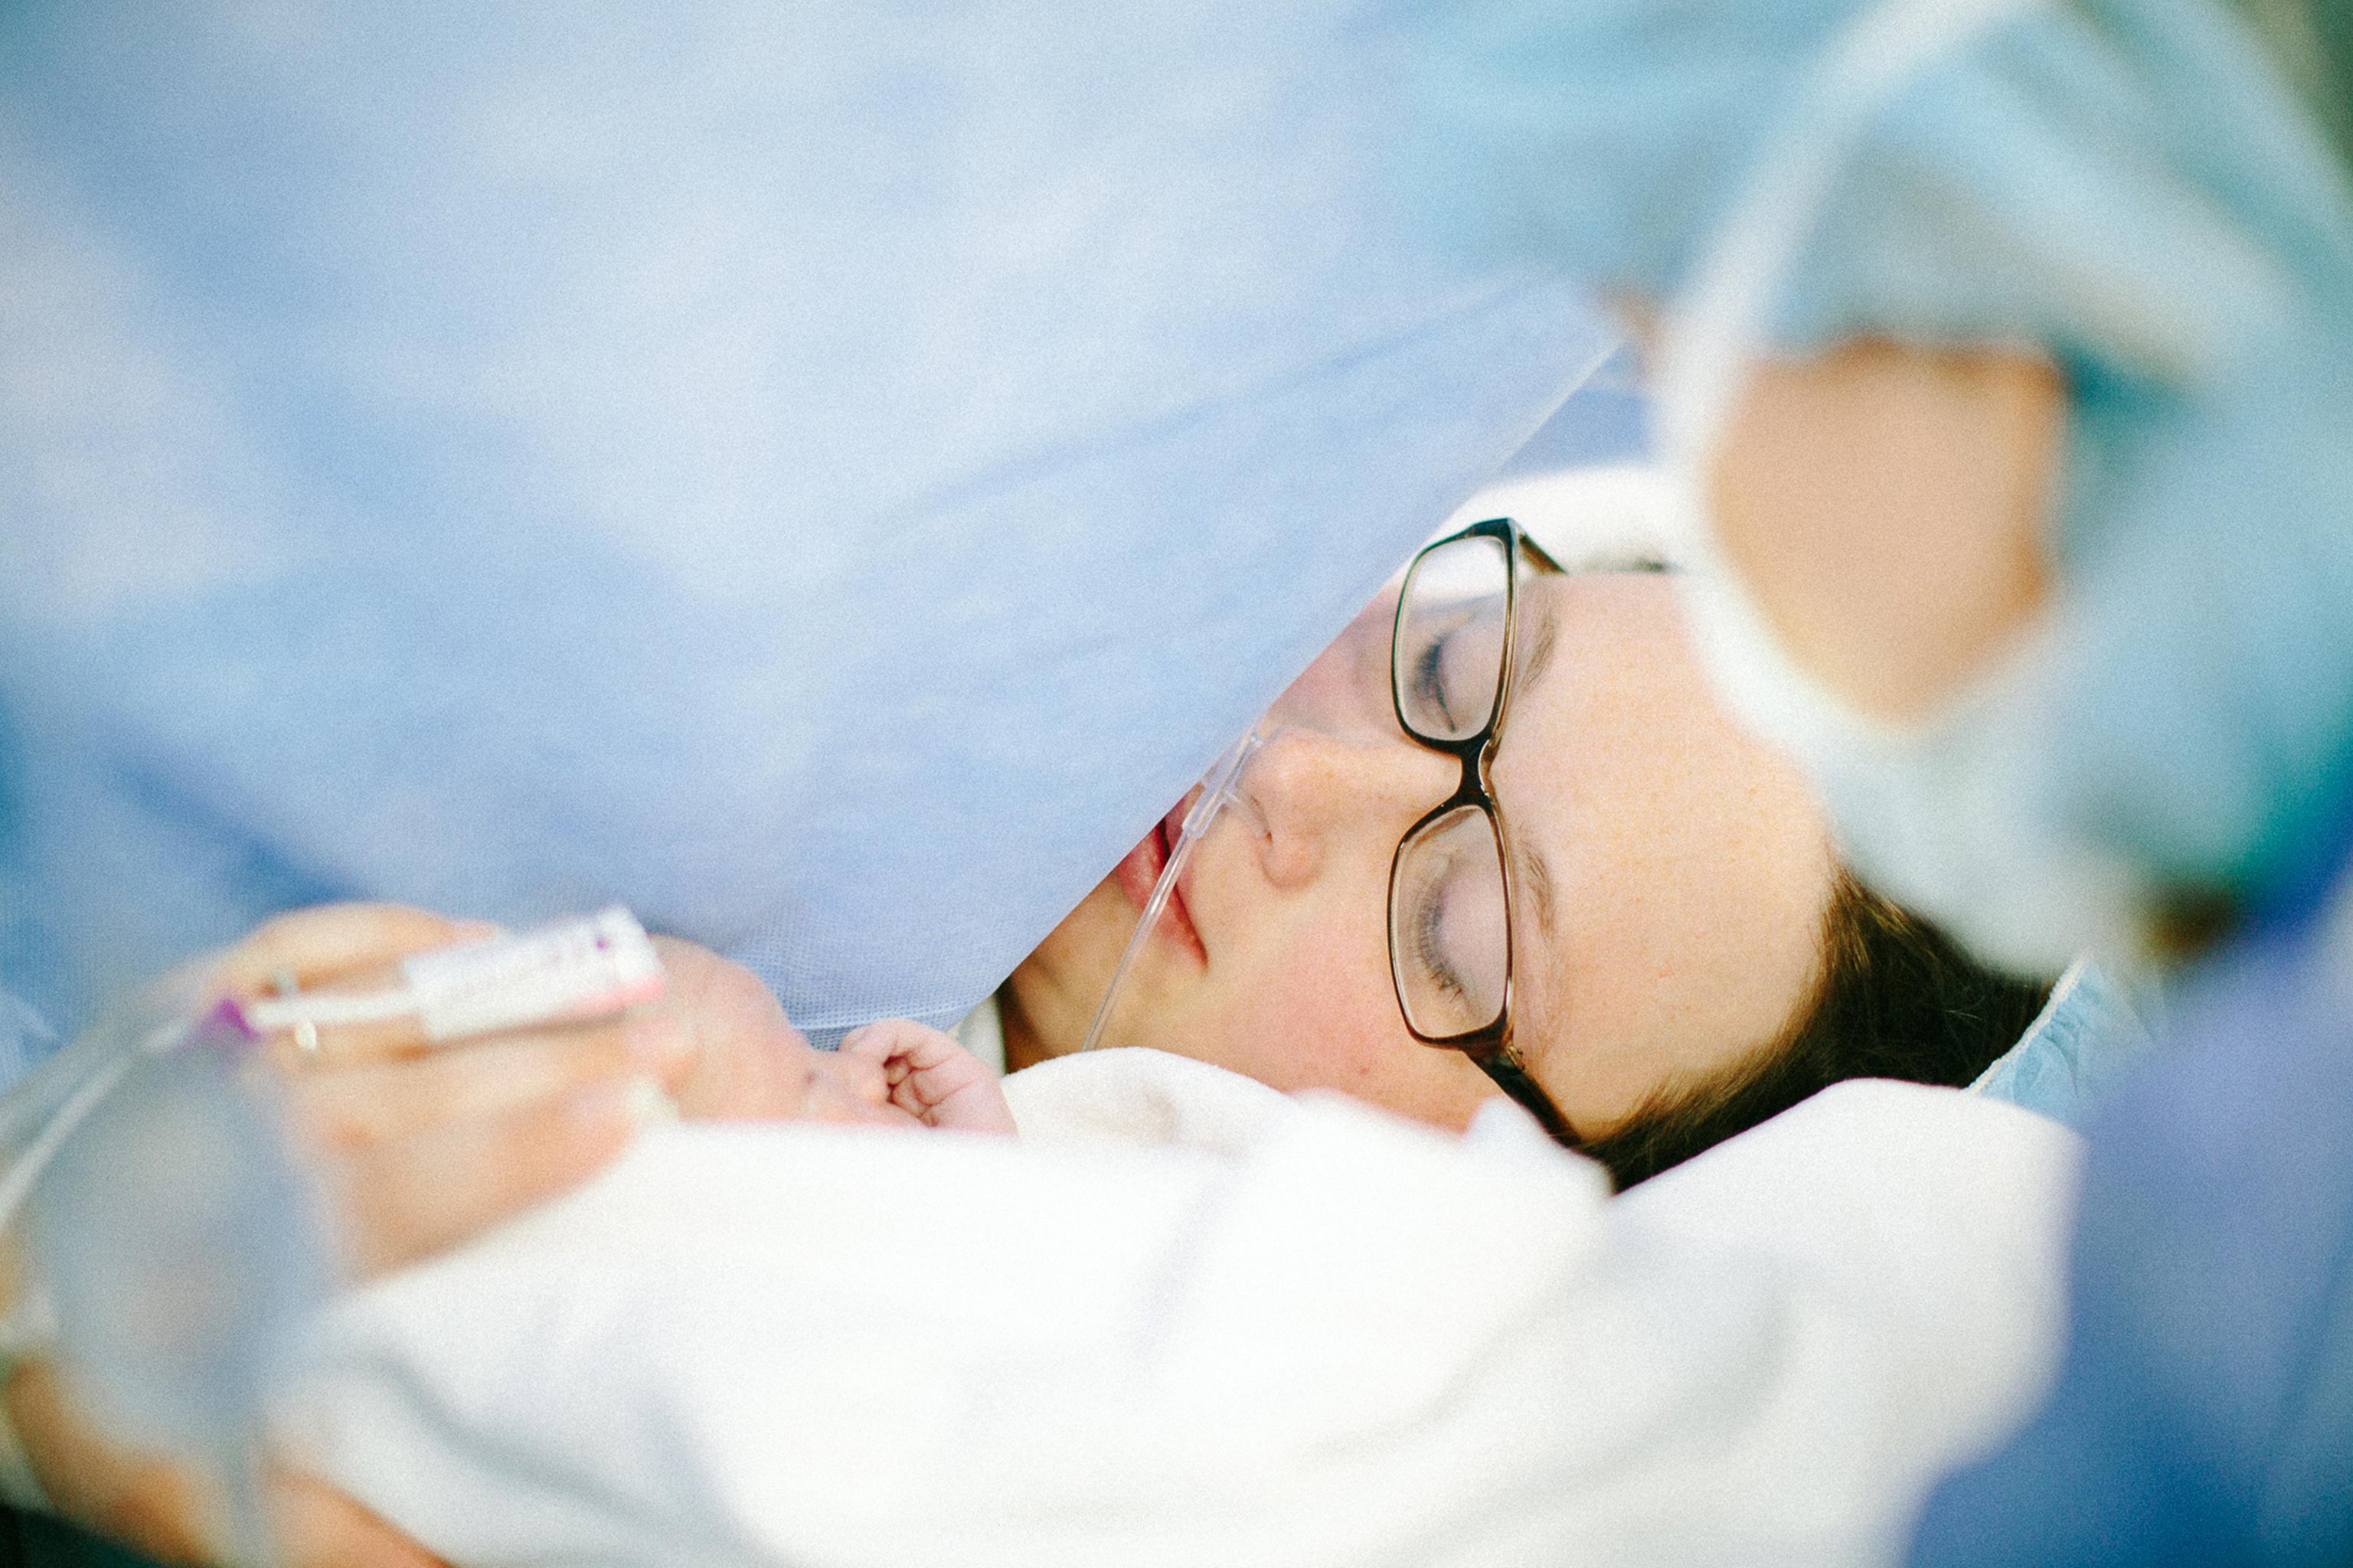 birth story mother in c-section labor and delivery photo in hospital newborn photographer